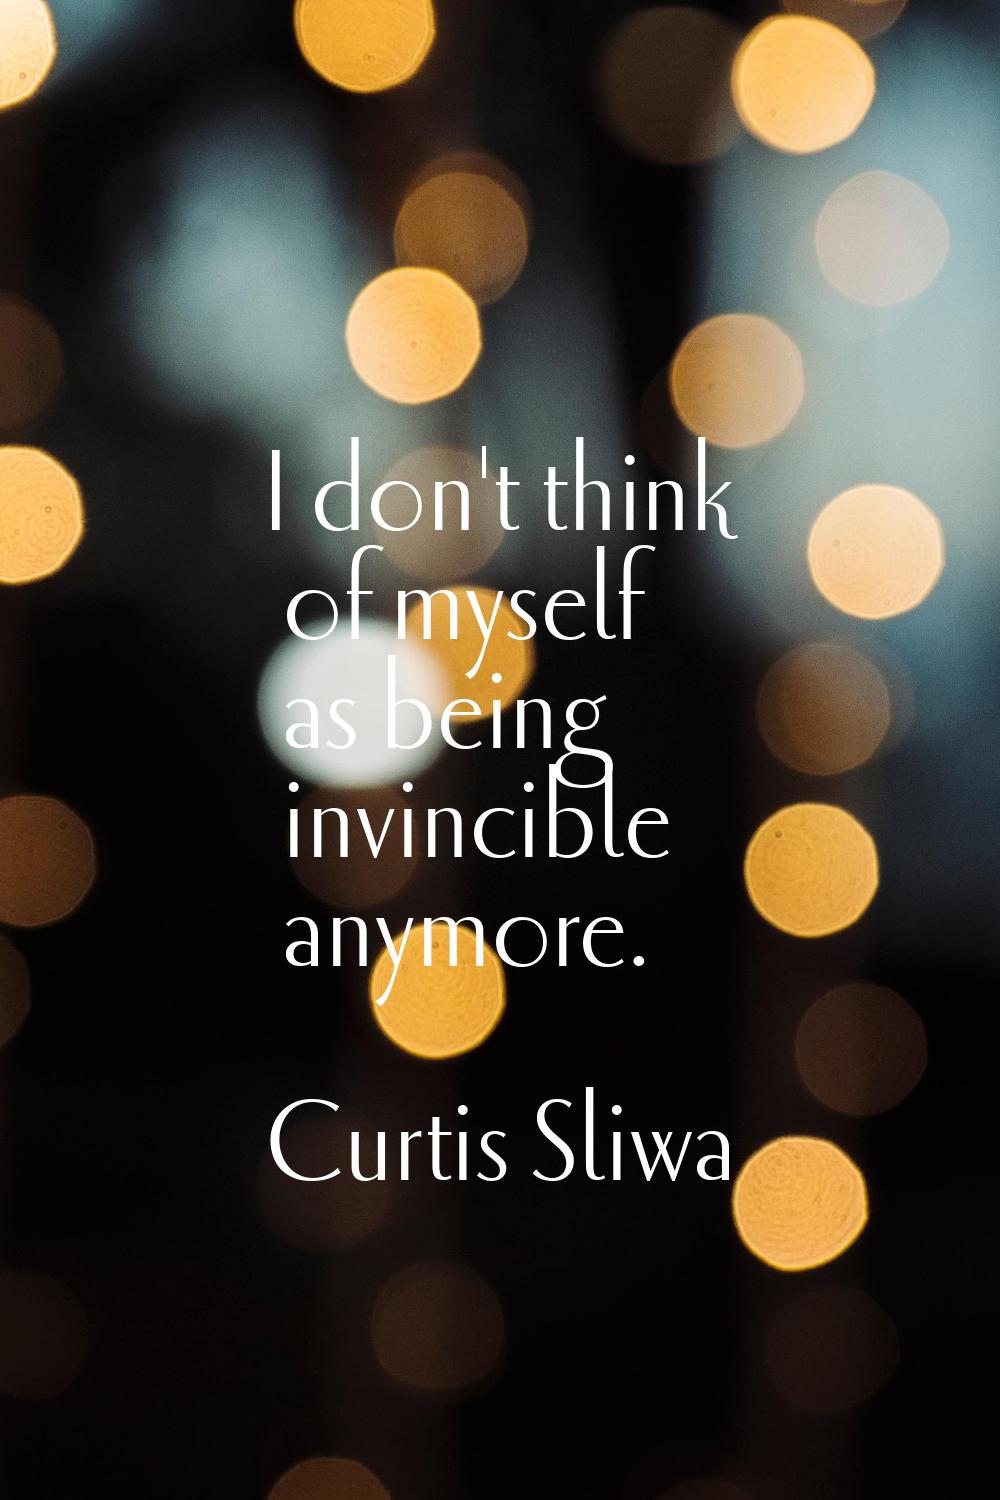 I don't think of myself as being invincible anymore.